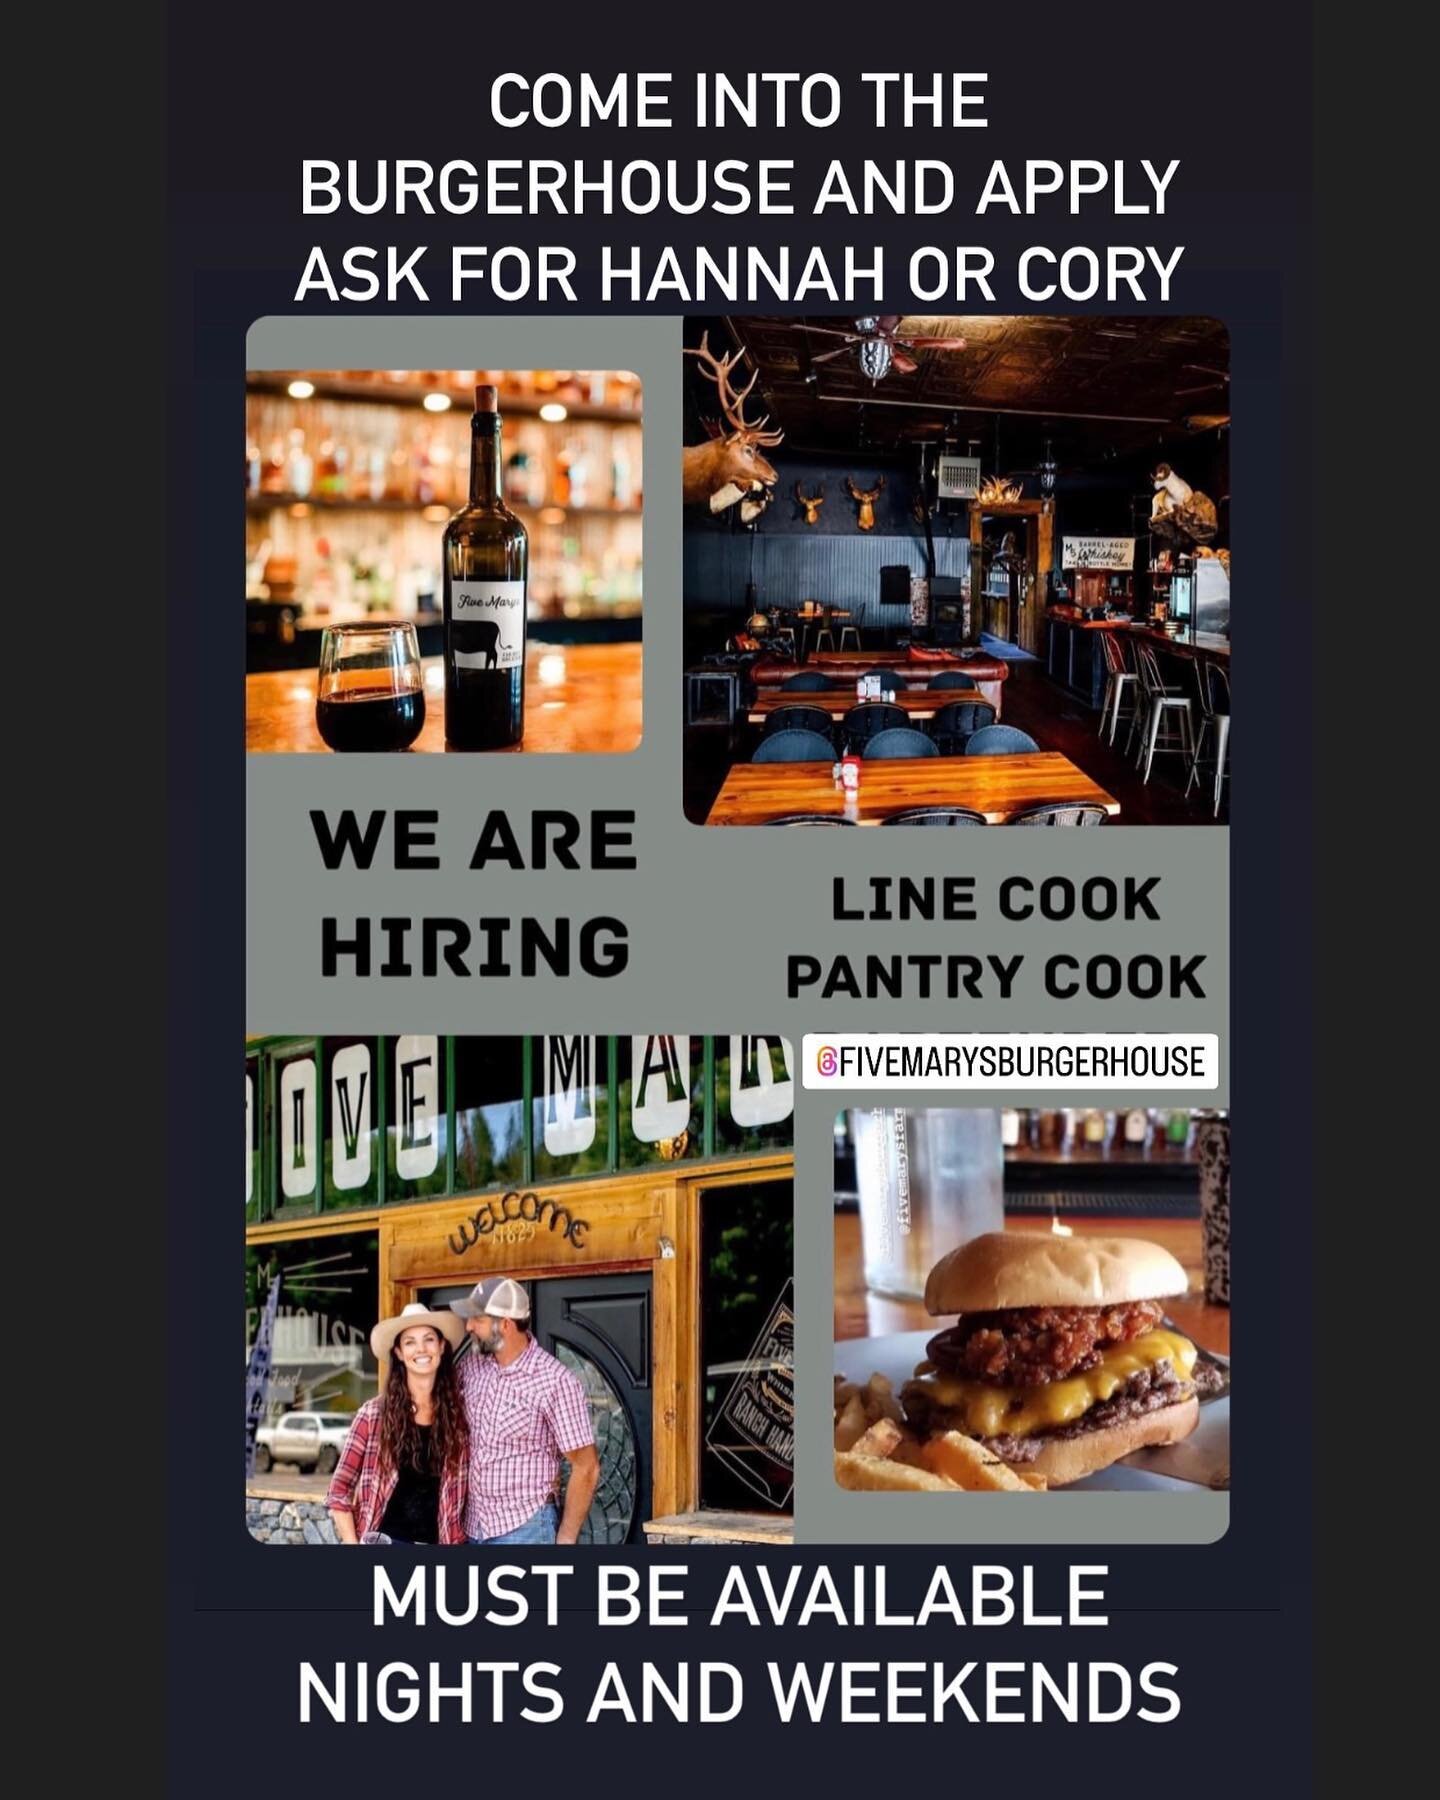 Competitive pay, food and a fun staff and atmosphere! Come apply we&rsquo;re getting ready for summer. Must be available nights and weekends.. no phone calls please! Stop by and ask for Hannah or Cory. We&rsquo;re open Monday-Saturday @11